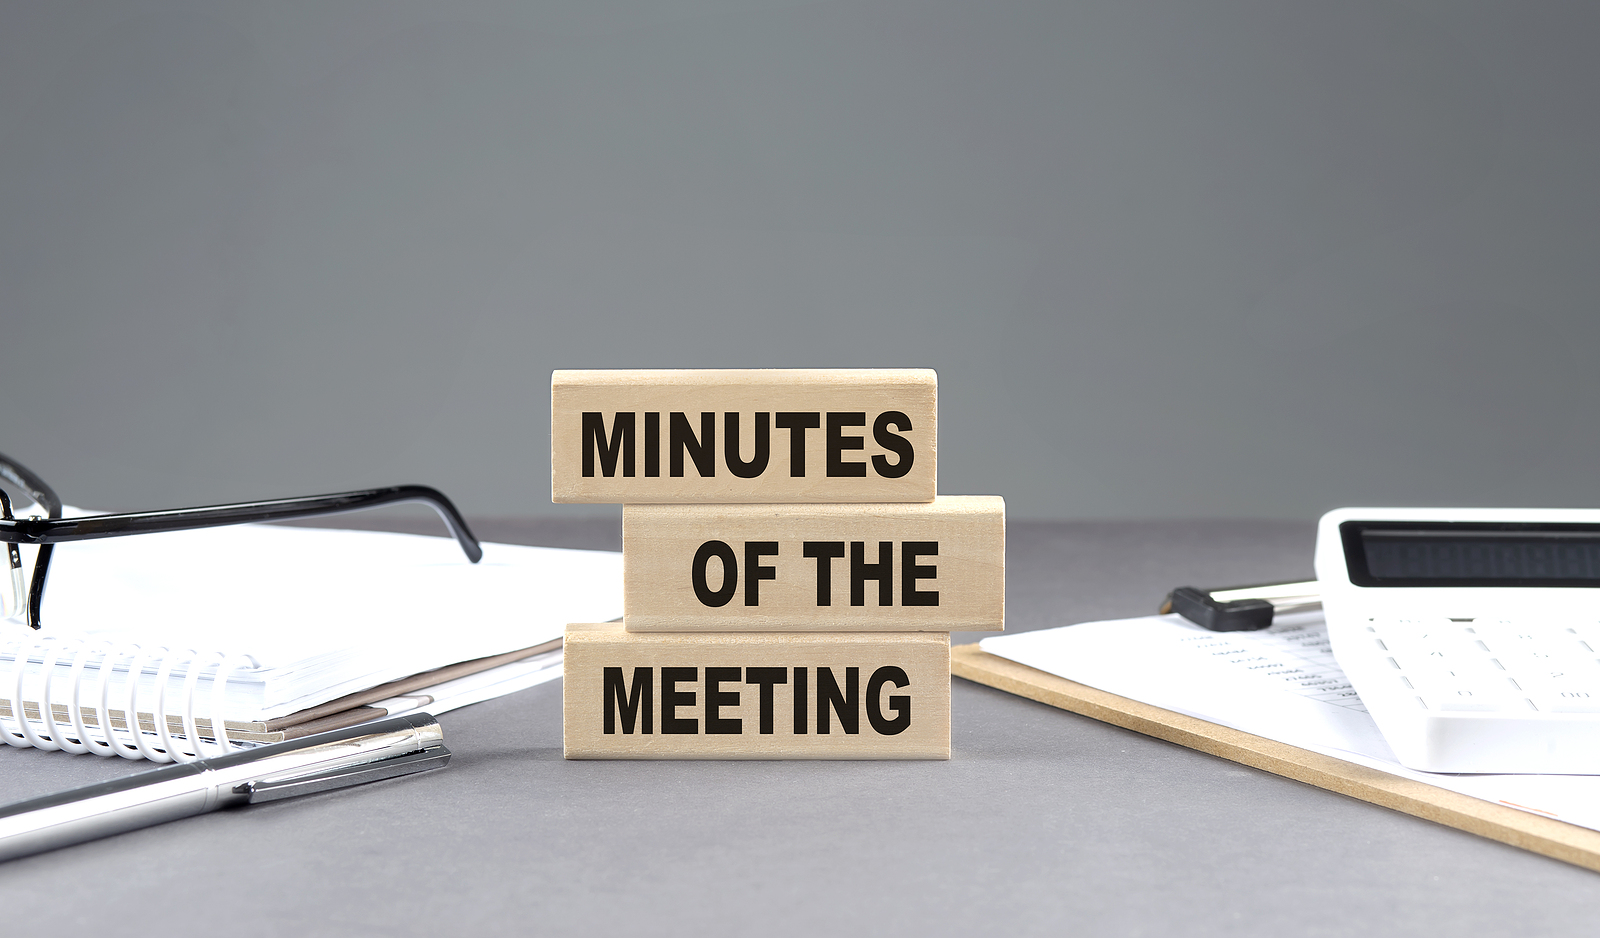 MINUTES OF THE MEETING text on a wooden block with notebook,chart and calculator, grey background